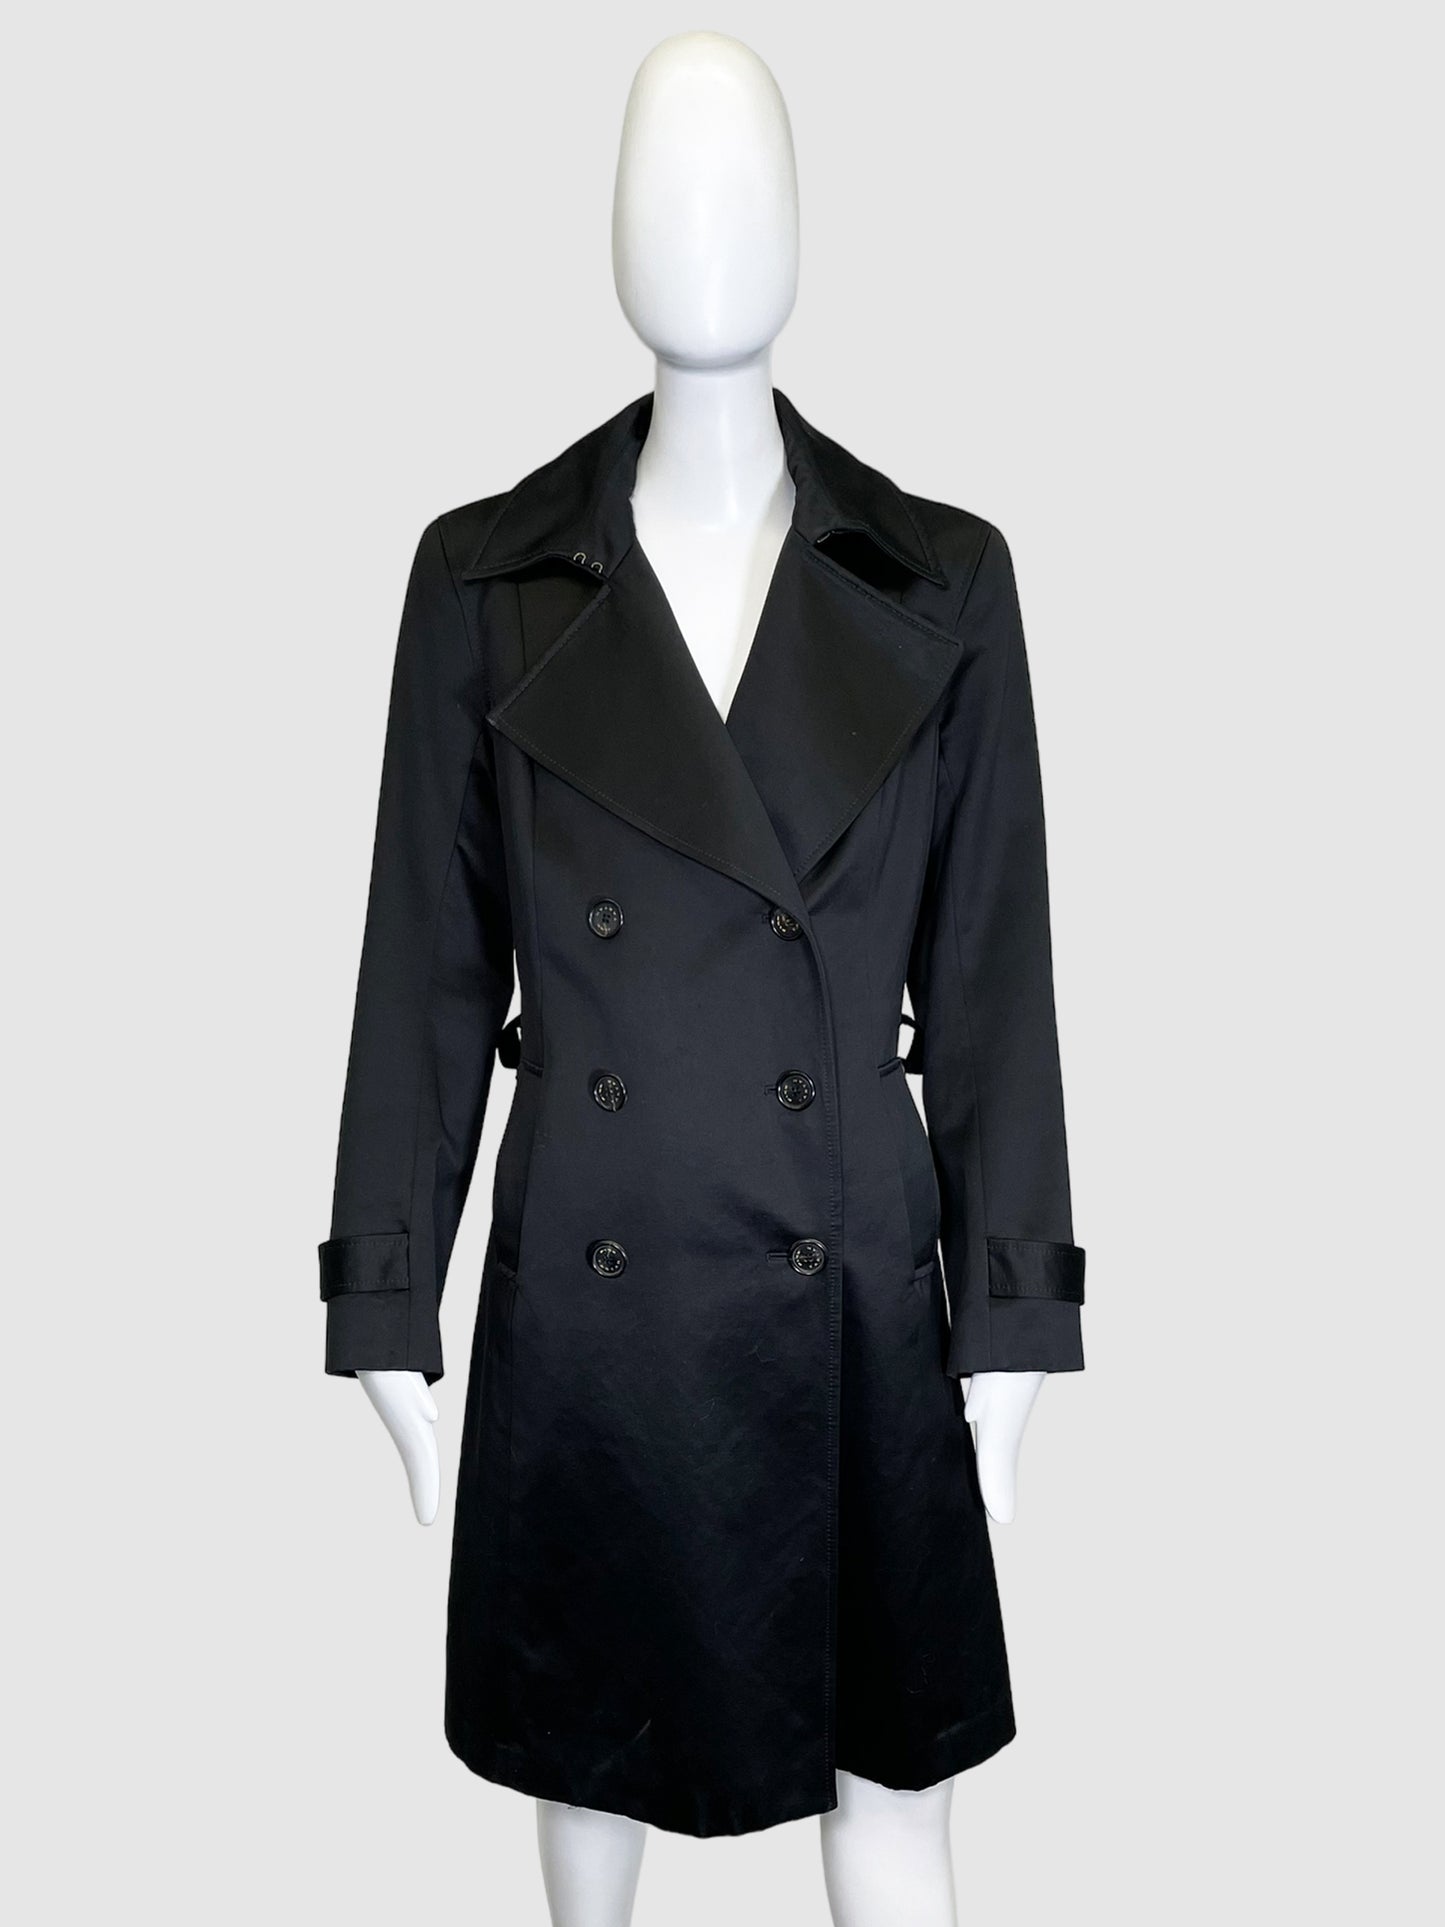 Satin Effect Trench Coat - Size 12